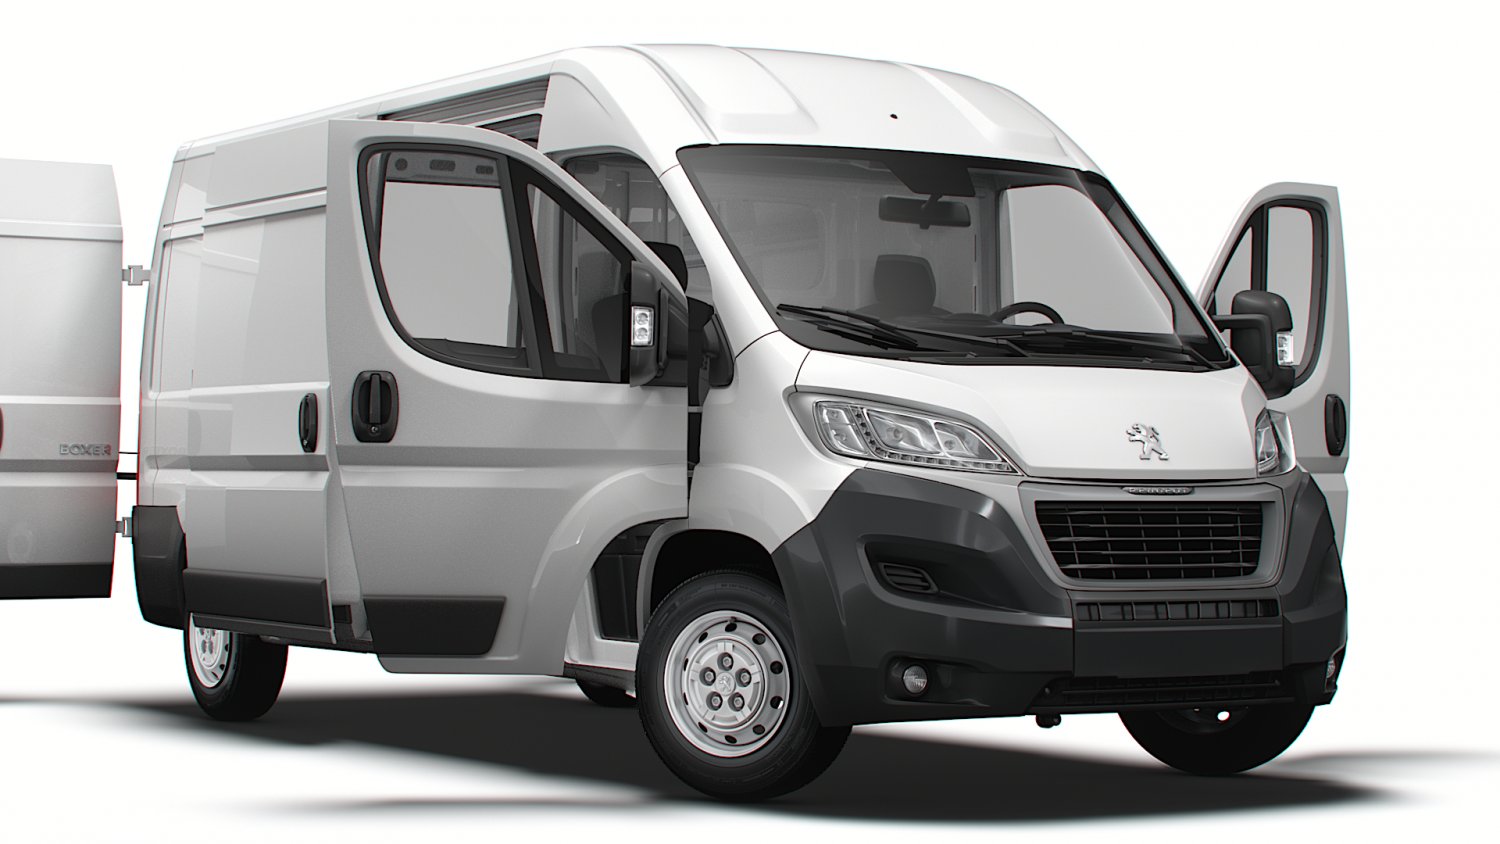 New PEUGEOT Boxer: New Qualities At The Service Of Business, 46% OFF